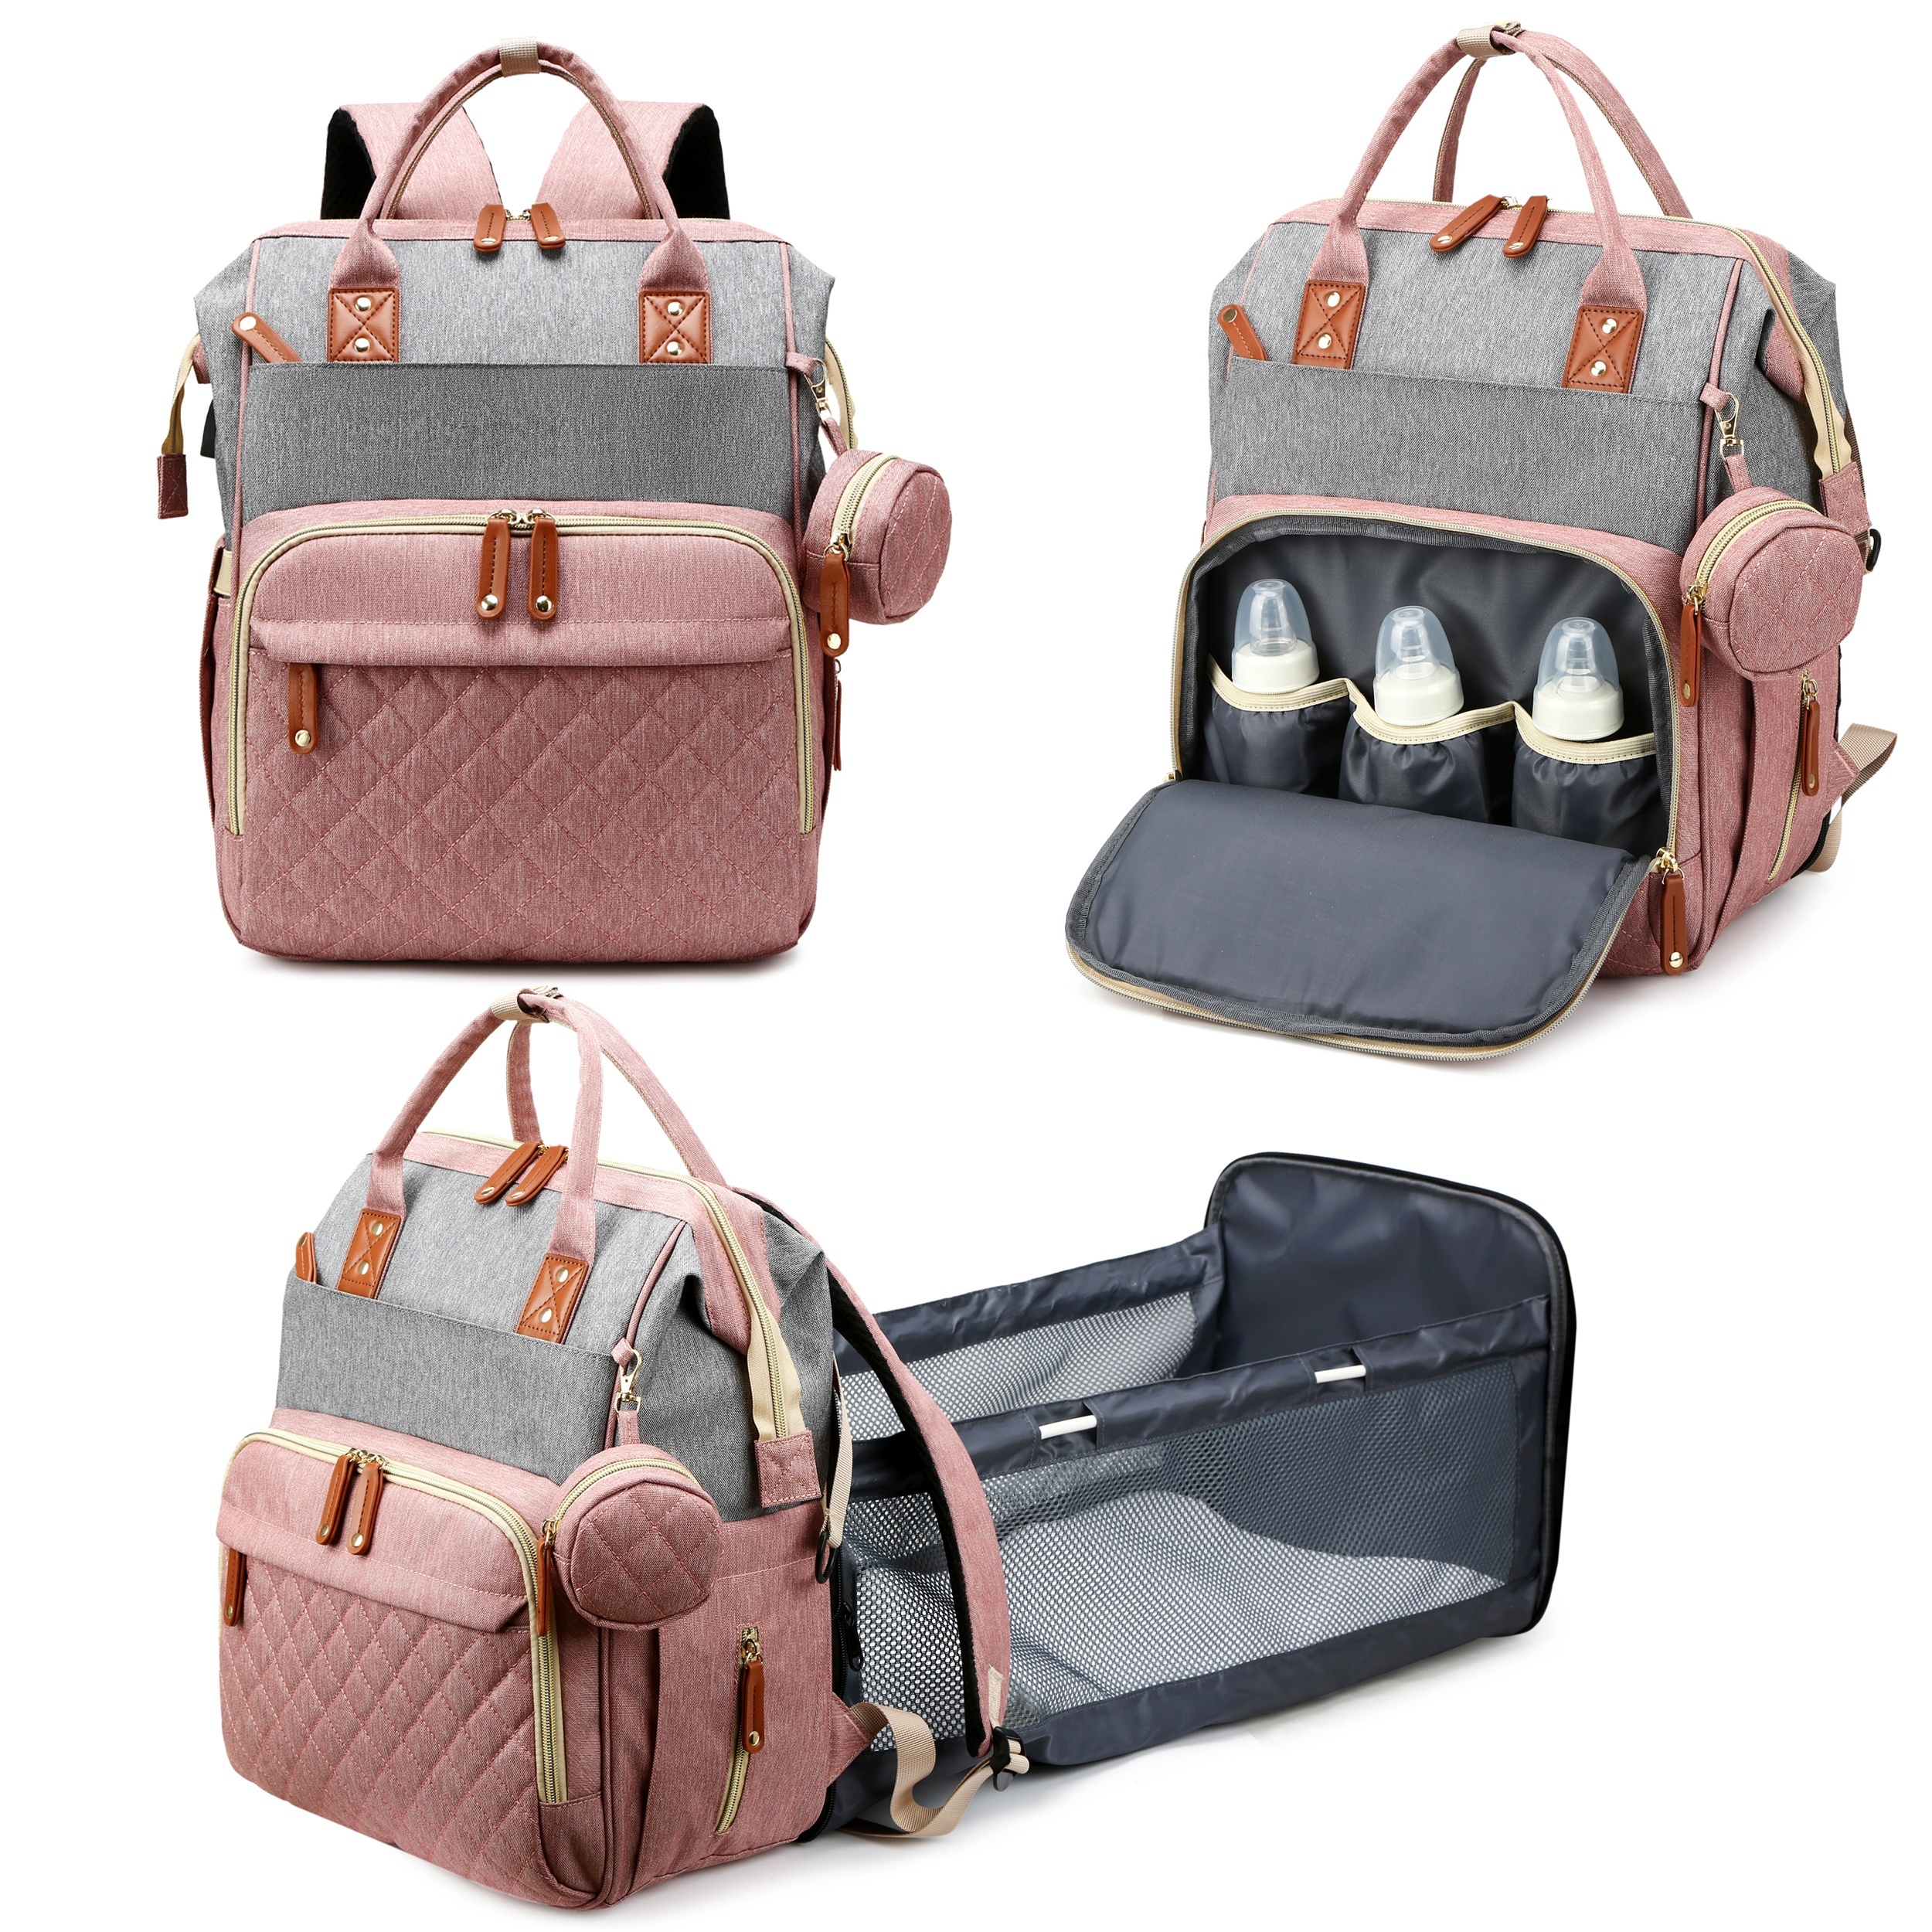 Mommy Bag Organizer Cute Embroidery Newborn Baby Diaper Bag Travel Stroller Storage Packs for New Mothers and Expecting Moms, Infant Girl's, Size: One